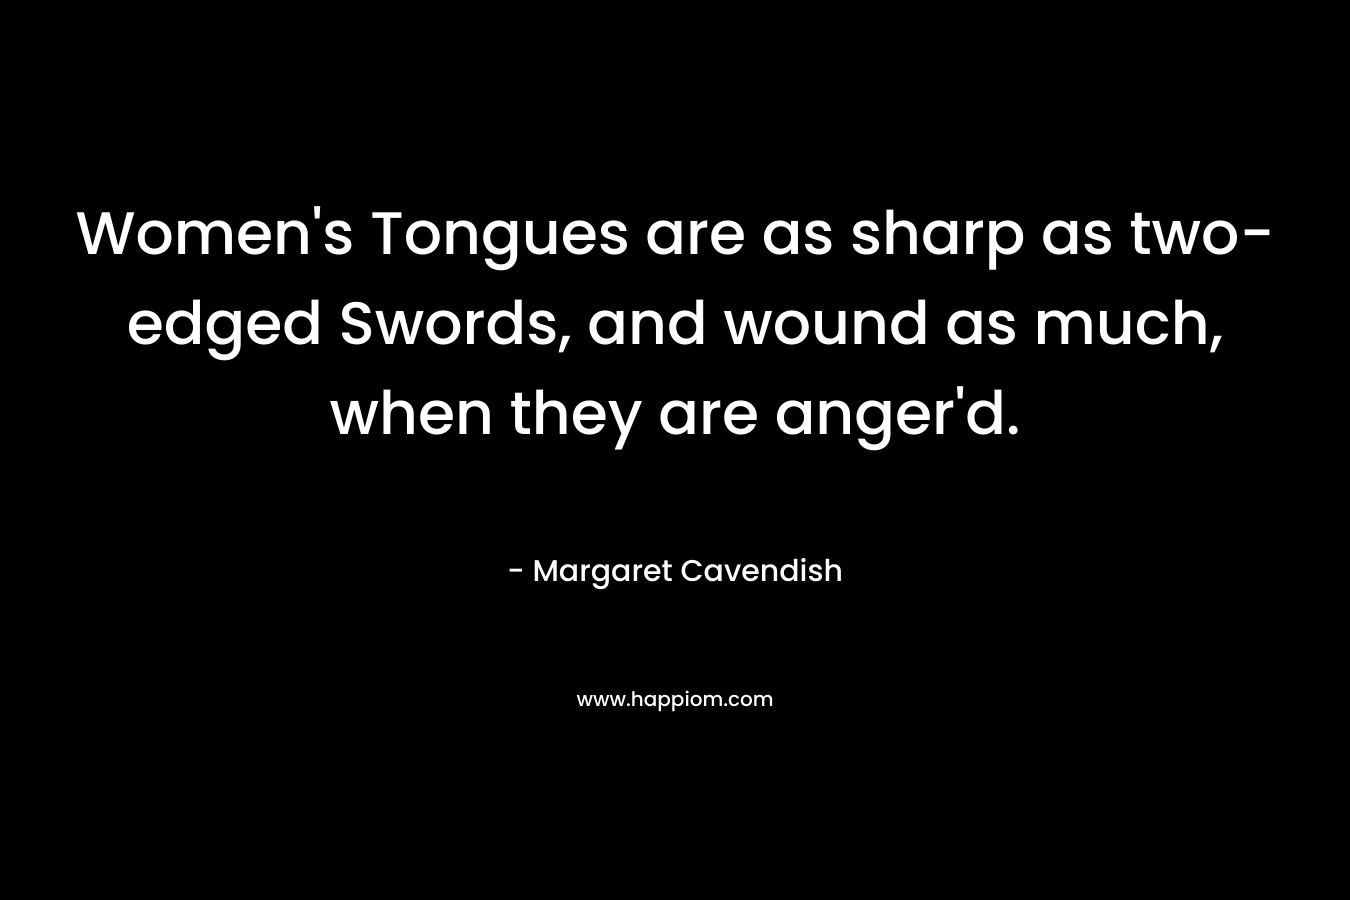 Women's Tongues are as sharp as two-edged Swords, and wound as much, when they are anger'd.